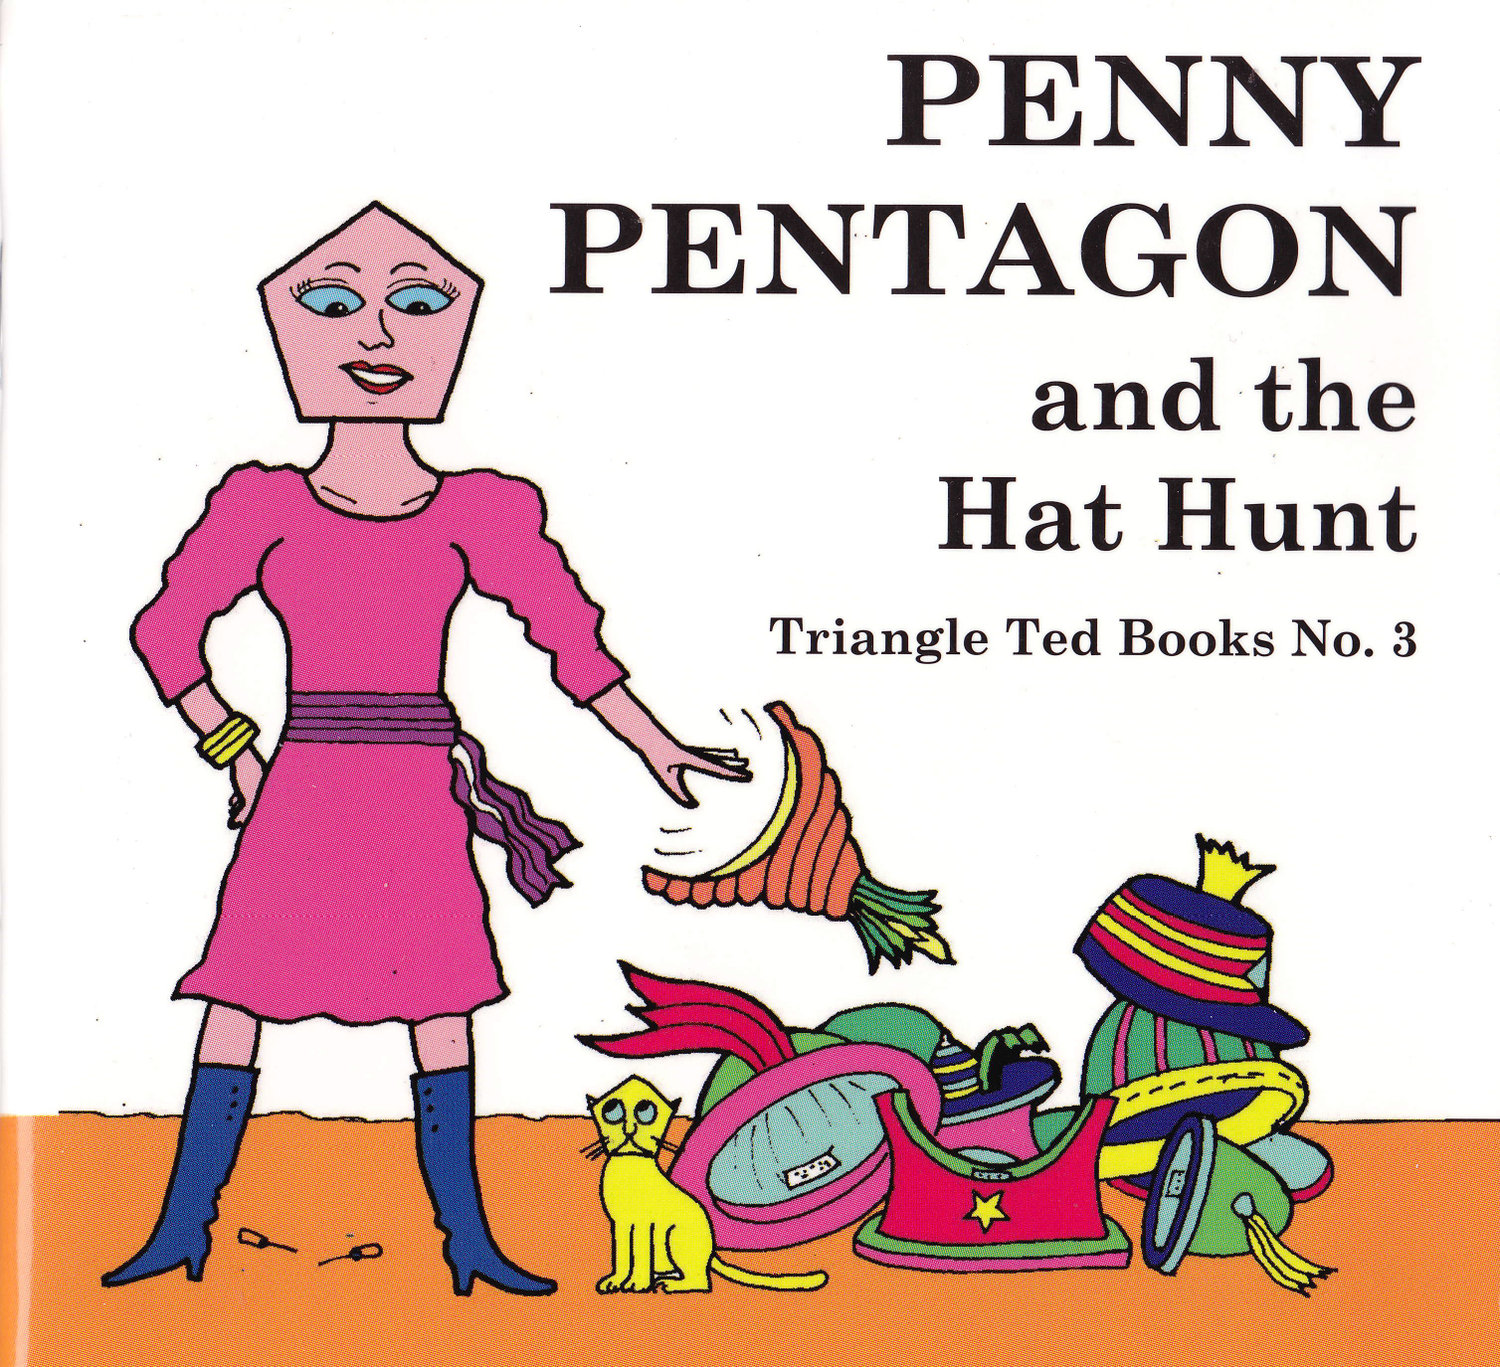 Image of PENNY PENTAGON and the Hat Hunt